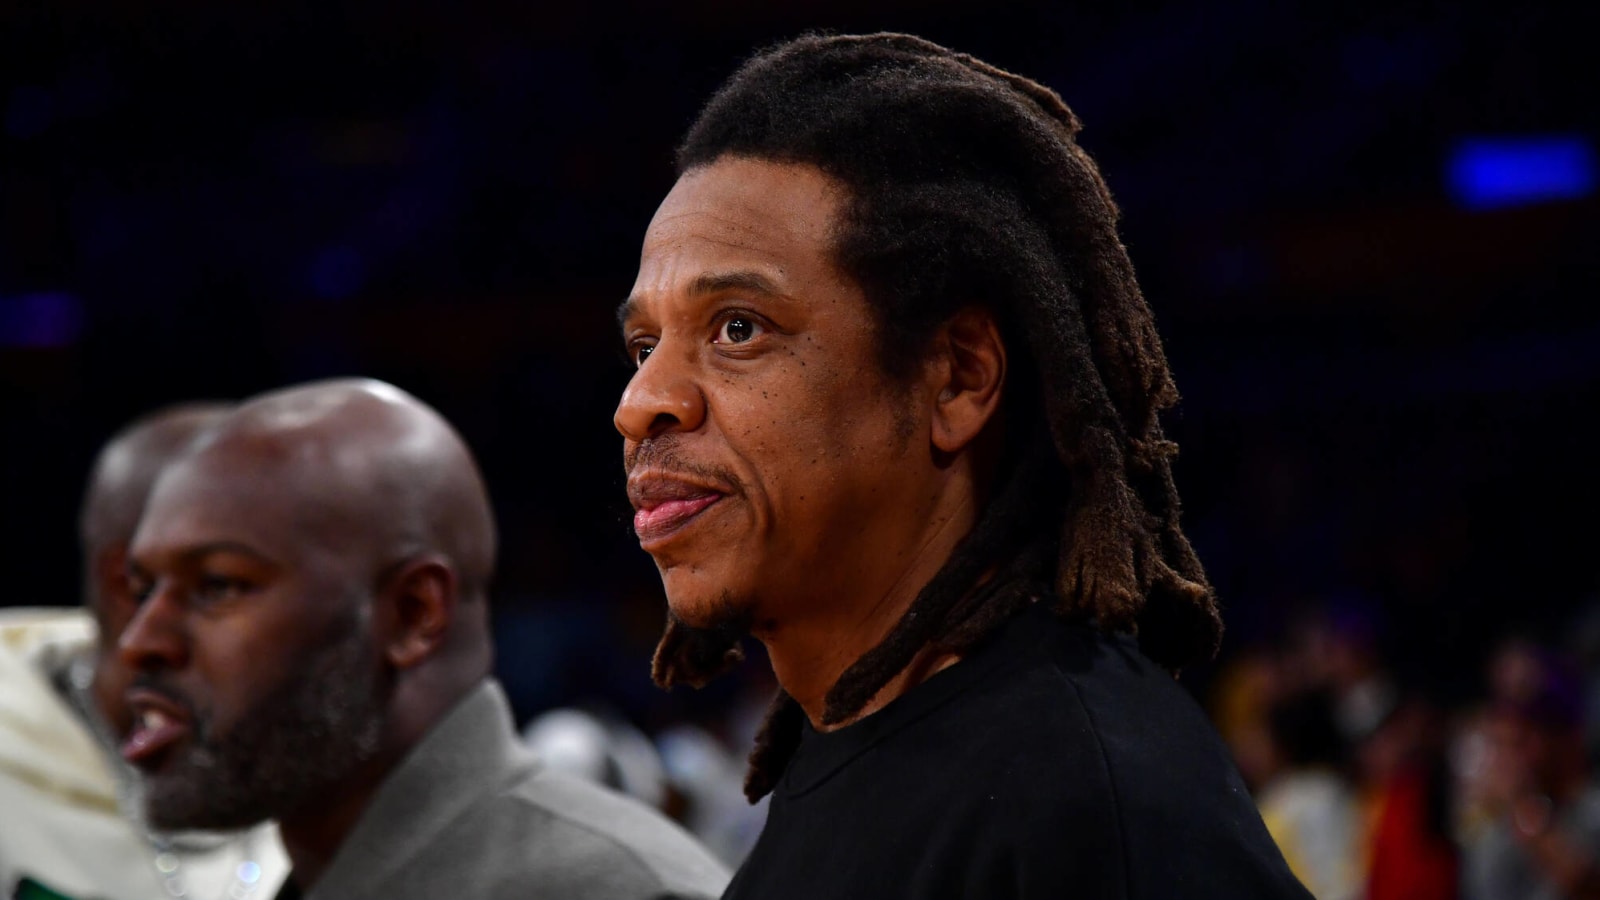 Jay-Z tried to calm down an upset Denzel Washington during incident at Lakers game